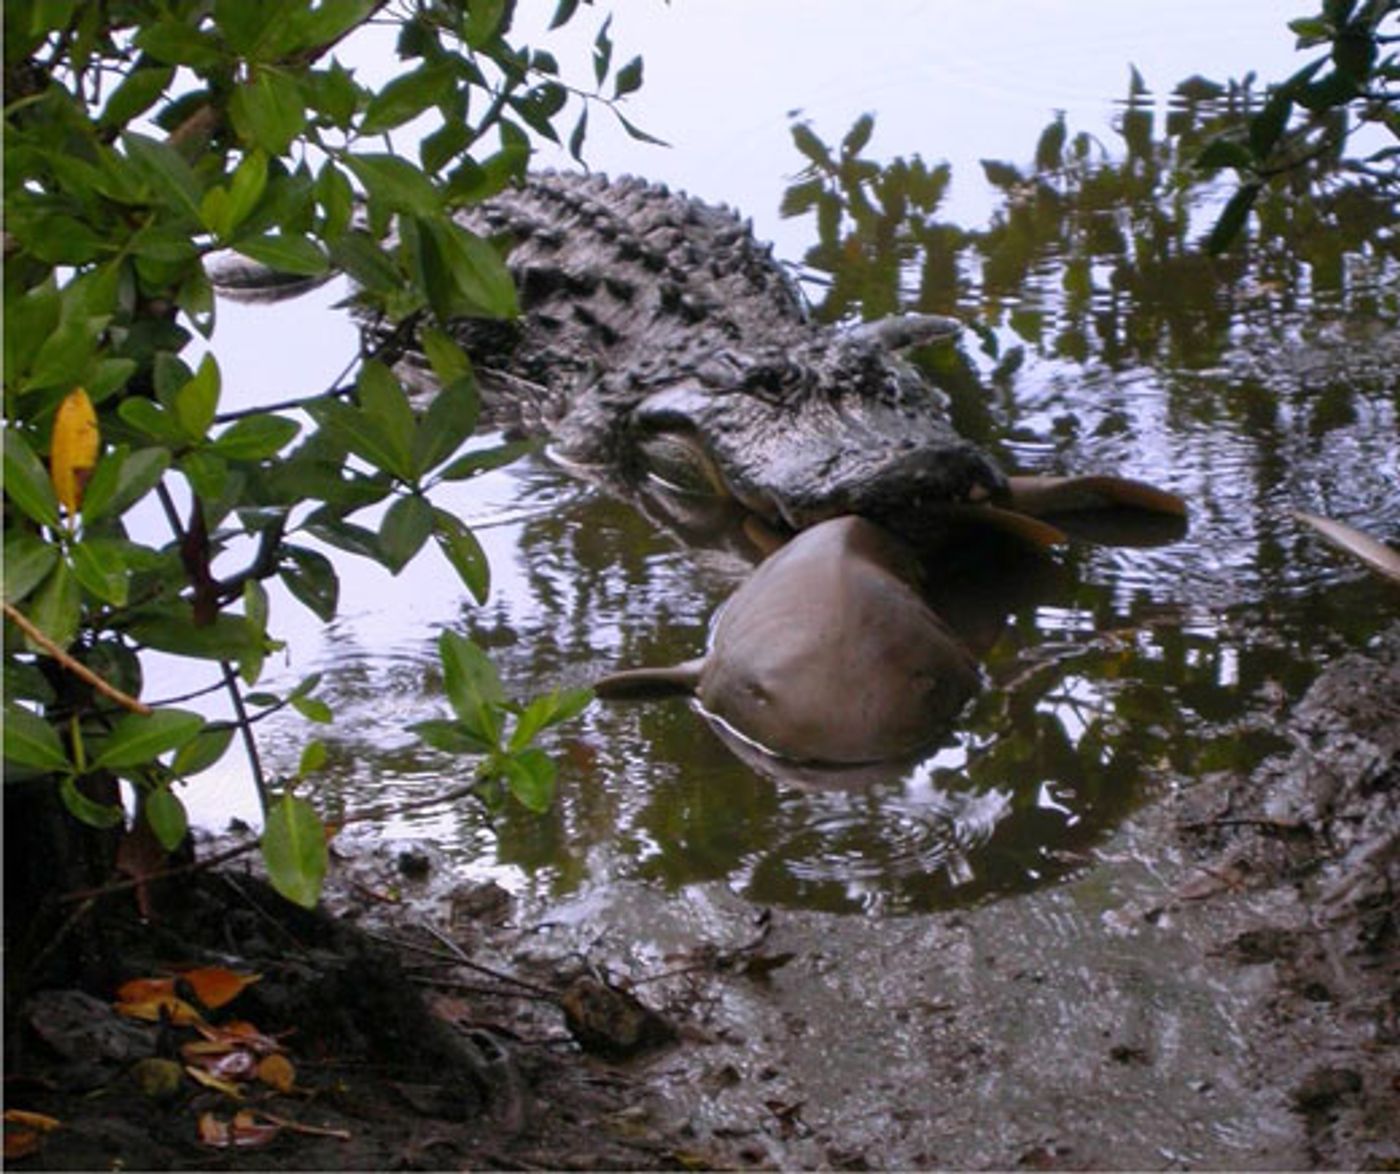 An alligator is shown with a juvenile shark in its jaws.